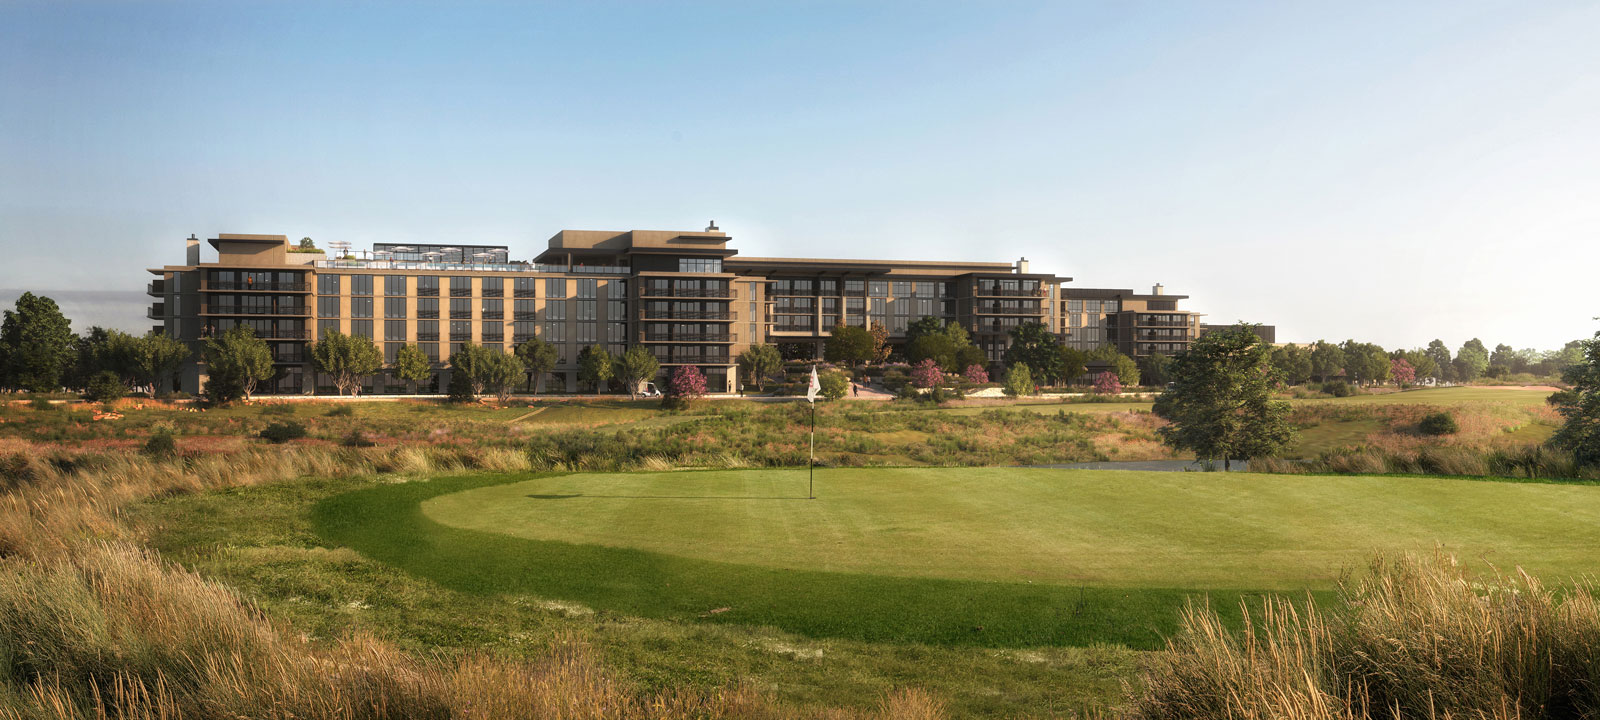 The beautiful Omni PGA Frisco Resort stands in the background of  a golf green in Frisco, Texas.